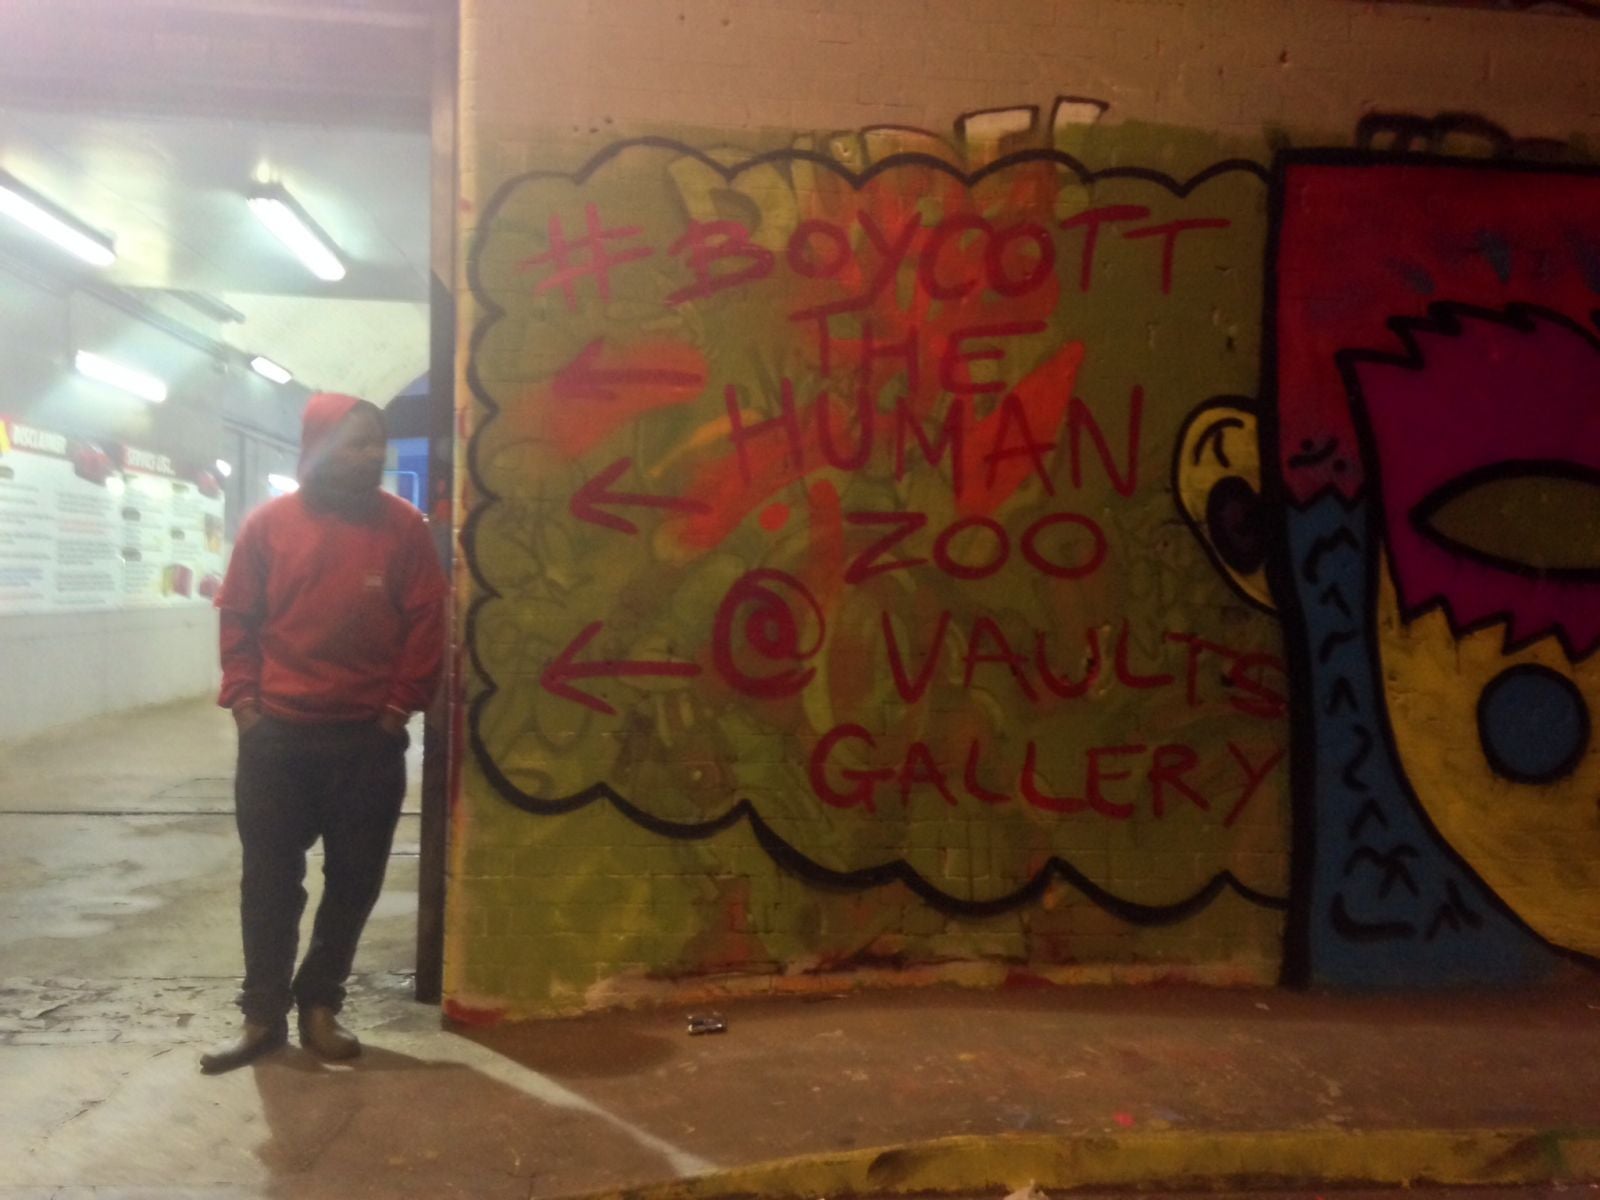 Graffiti on the walls of the underpath leading to the Vaults reads "Boycott the Human Zoo @ Vaults Gallery"